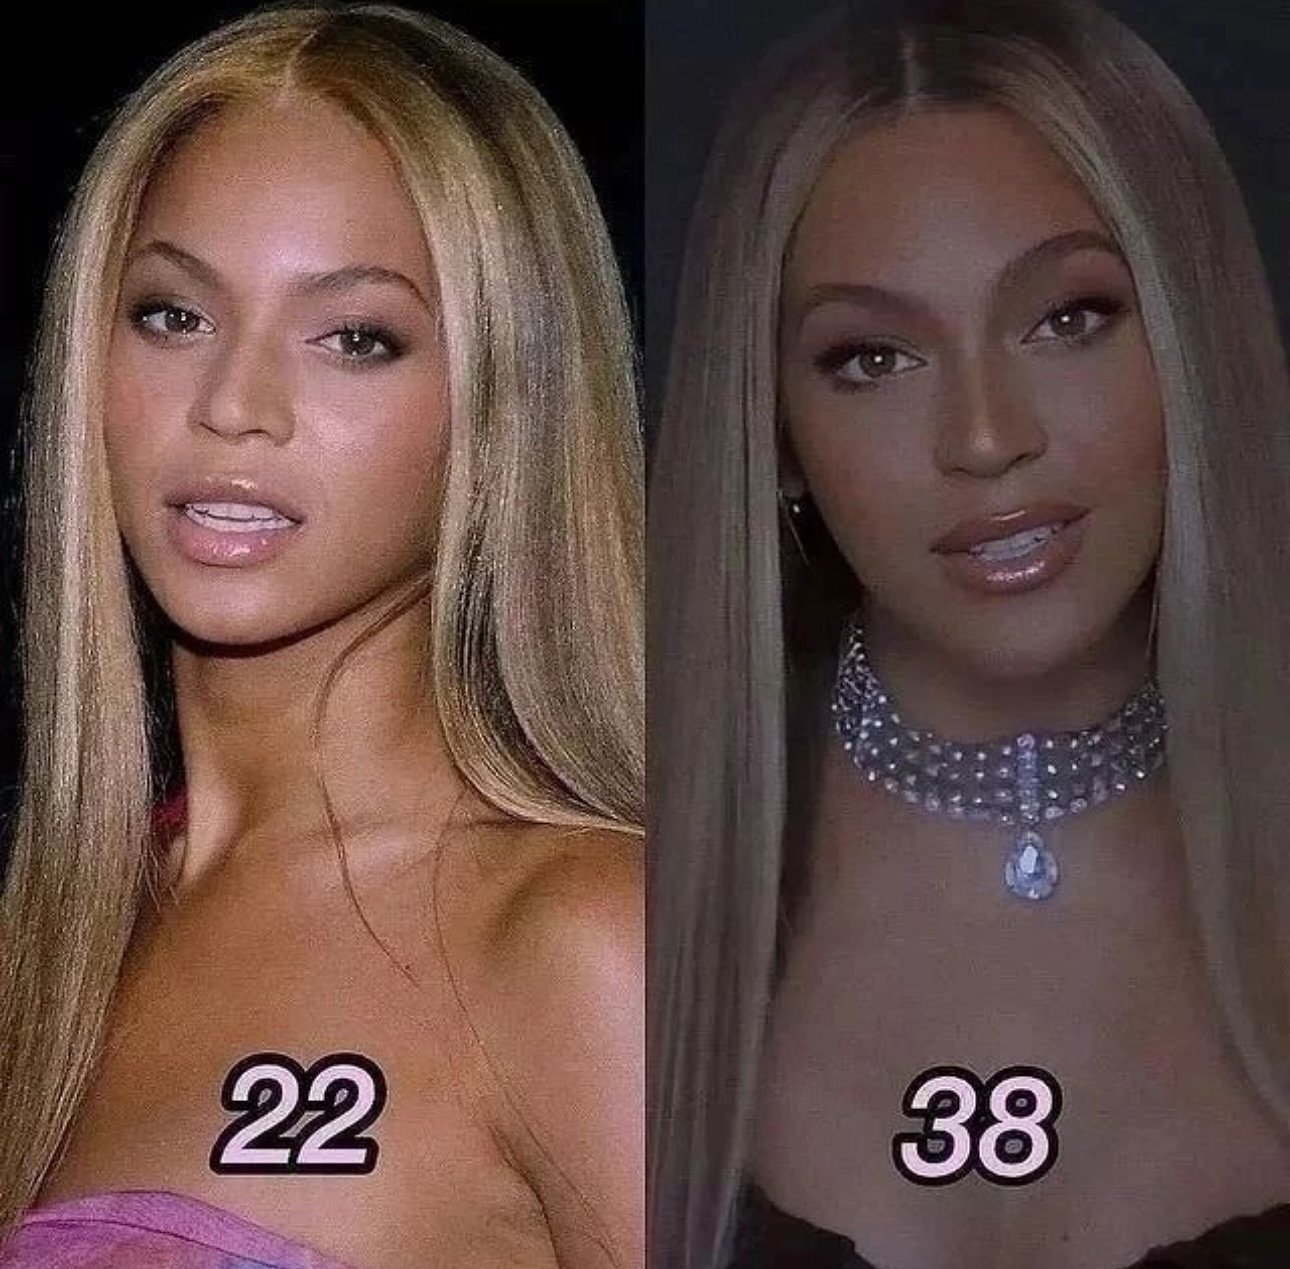 Beyonc&eacute; hasn&rsquo;t aged a day! What treatments do you think she gets any preventative treatments? 

Services we offer:
▪️ Fillers 
▪️ Anti-aging treatments
▪️ Facial Balancing
▪️ Laser Hair Removal
▪️ Skin Rejuvenation
▪️ Morpheus8 for face 